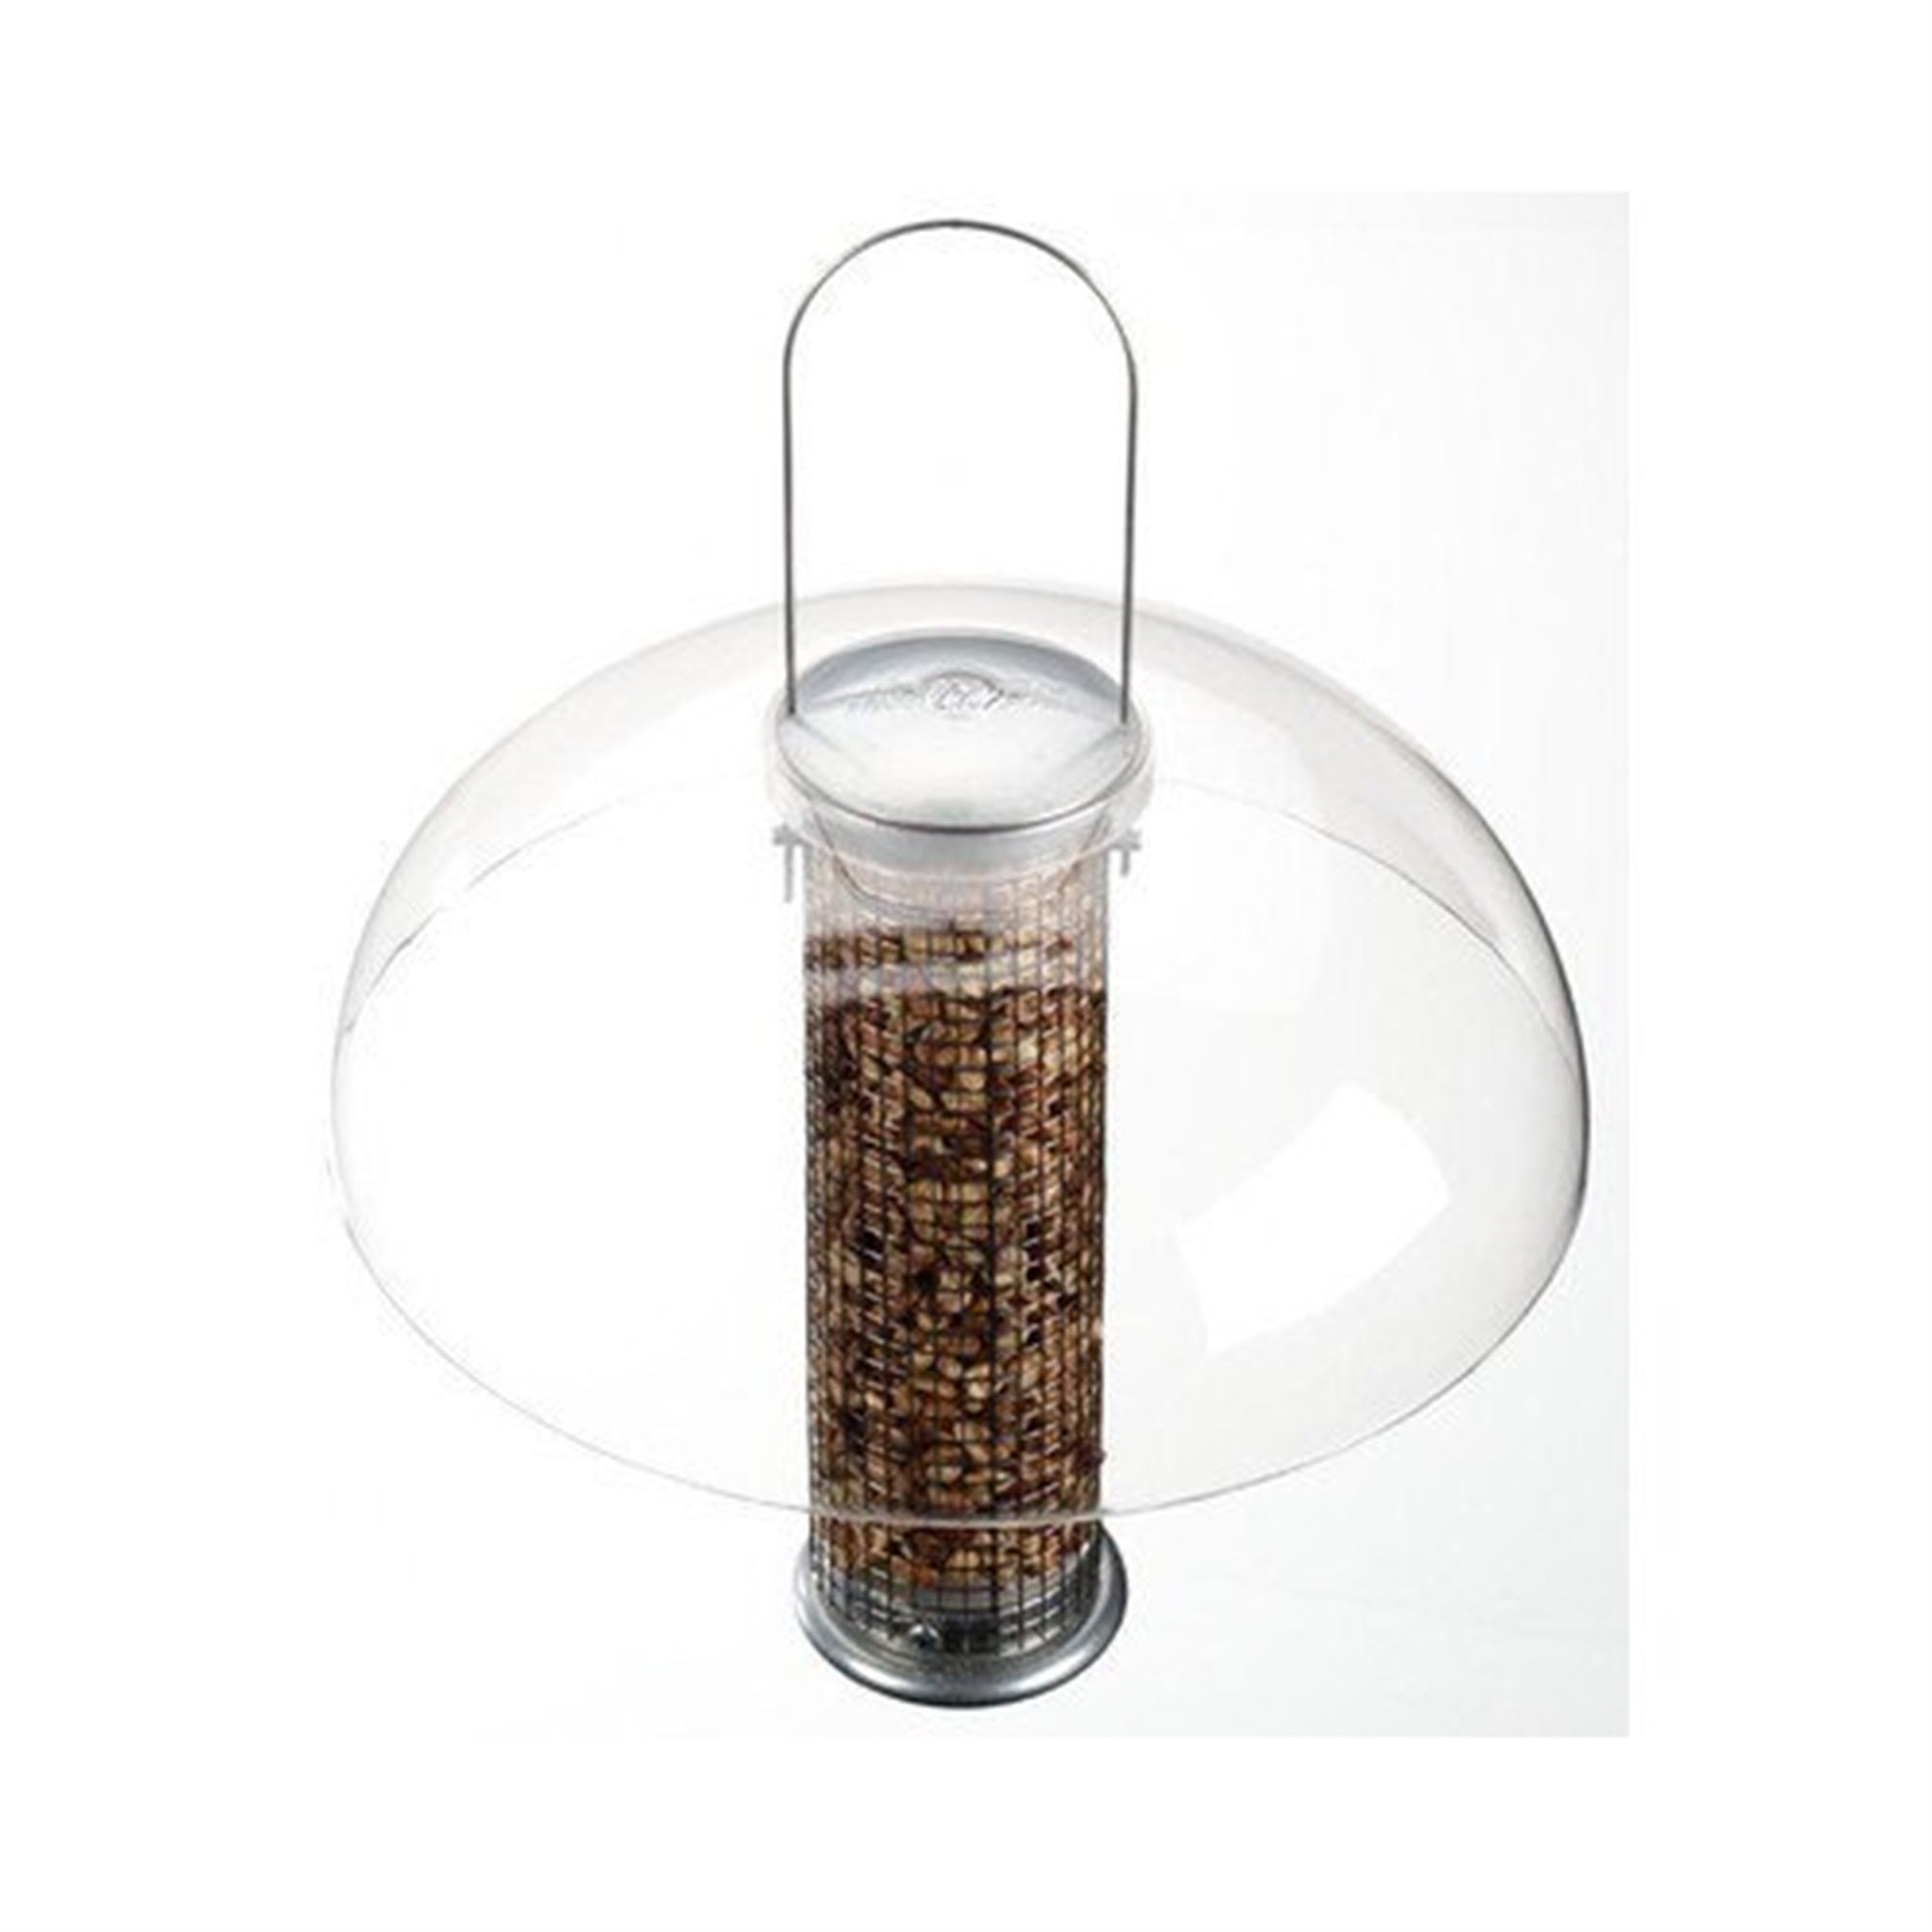 Aspects 12 Tube Top Bird Feeder Weather Dome